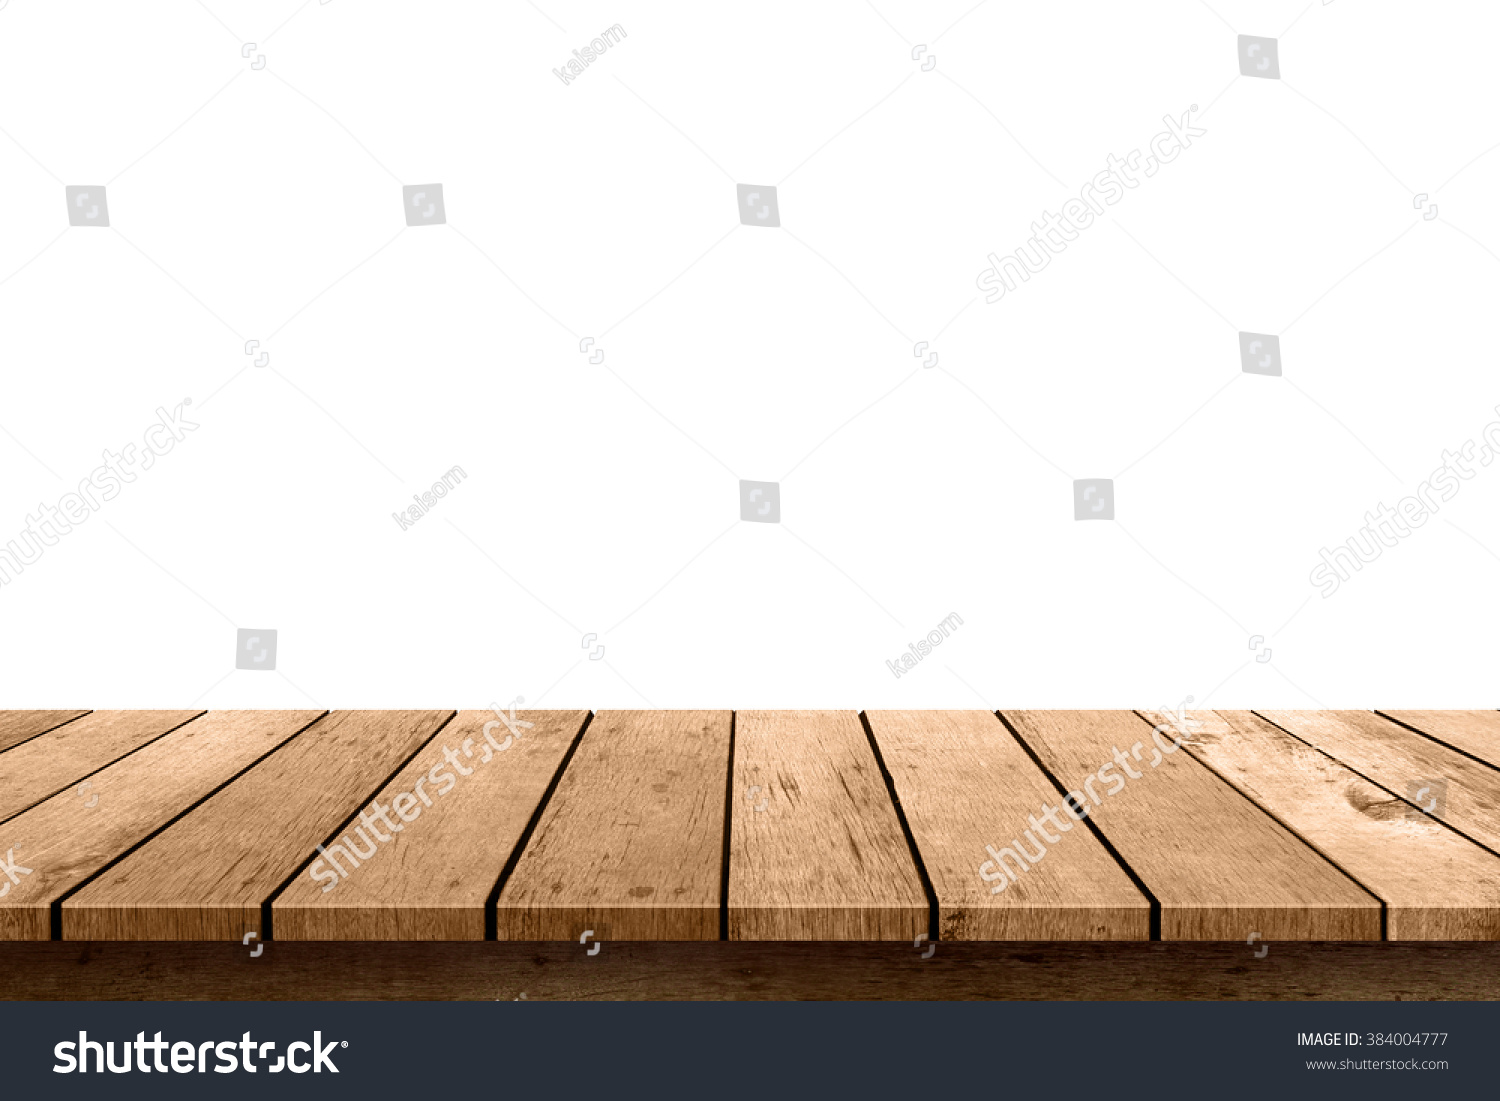 empty wooden table top isolated on white background, used for display or montage your products #384004777